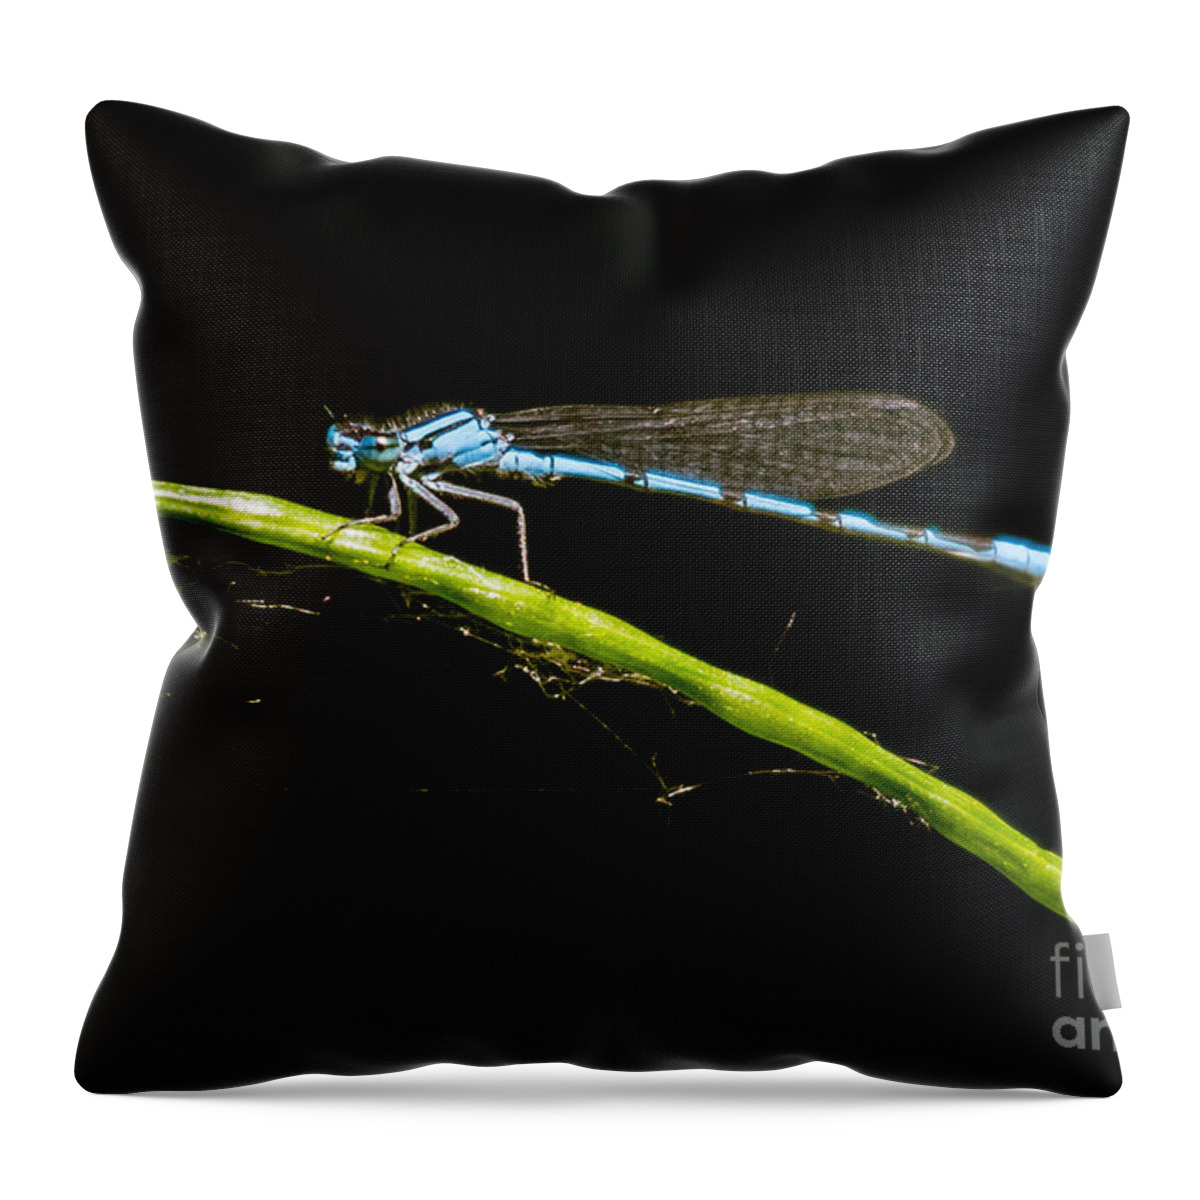 Ontario Throw Pillow featuring the photograph Sunlit Blue Beauty by Cheryl Baxter